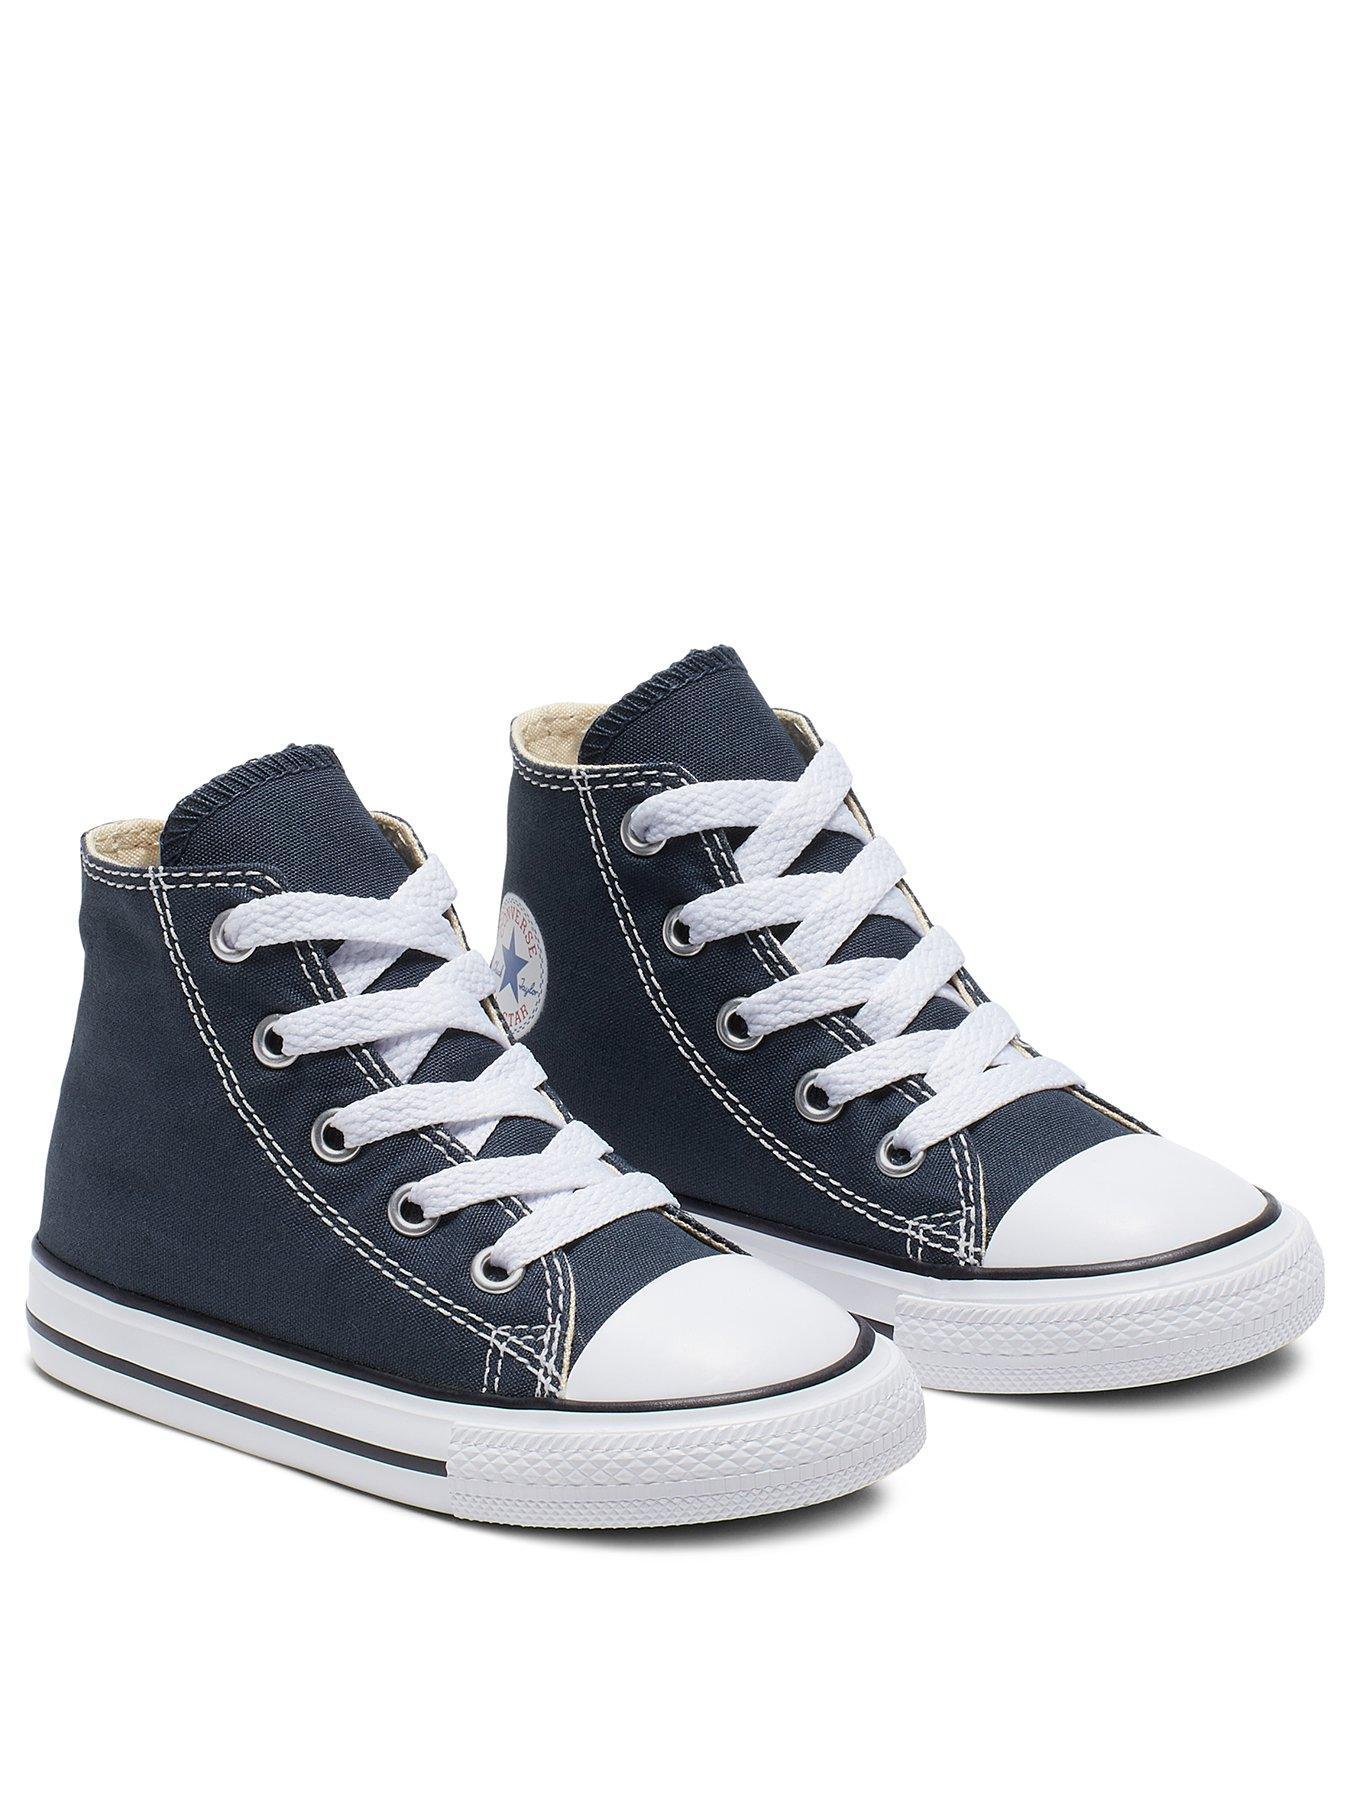 Converse Chuck Taylor All Star Infant Trainer - Navy | very.co.uk